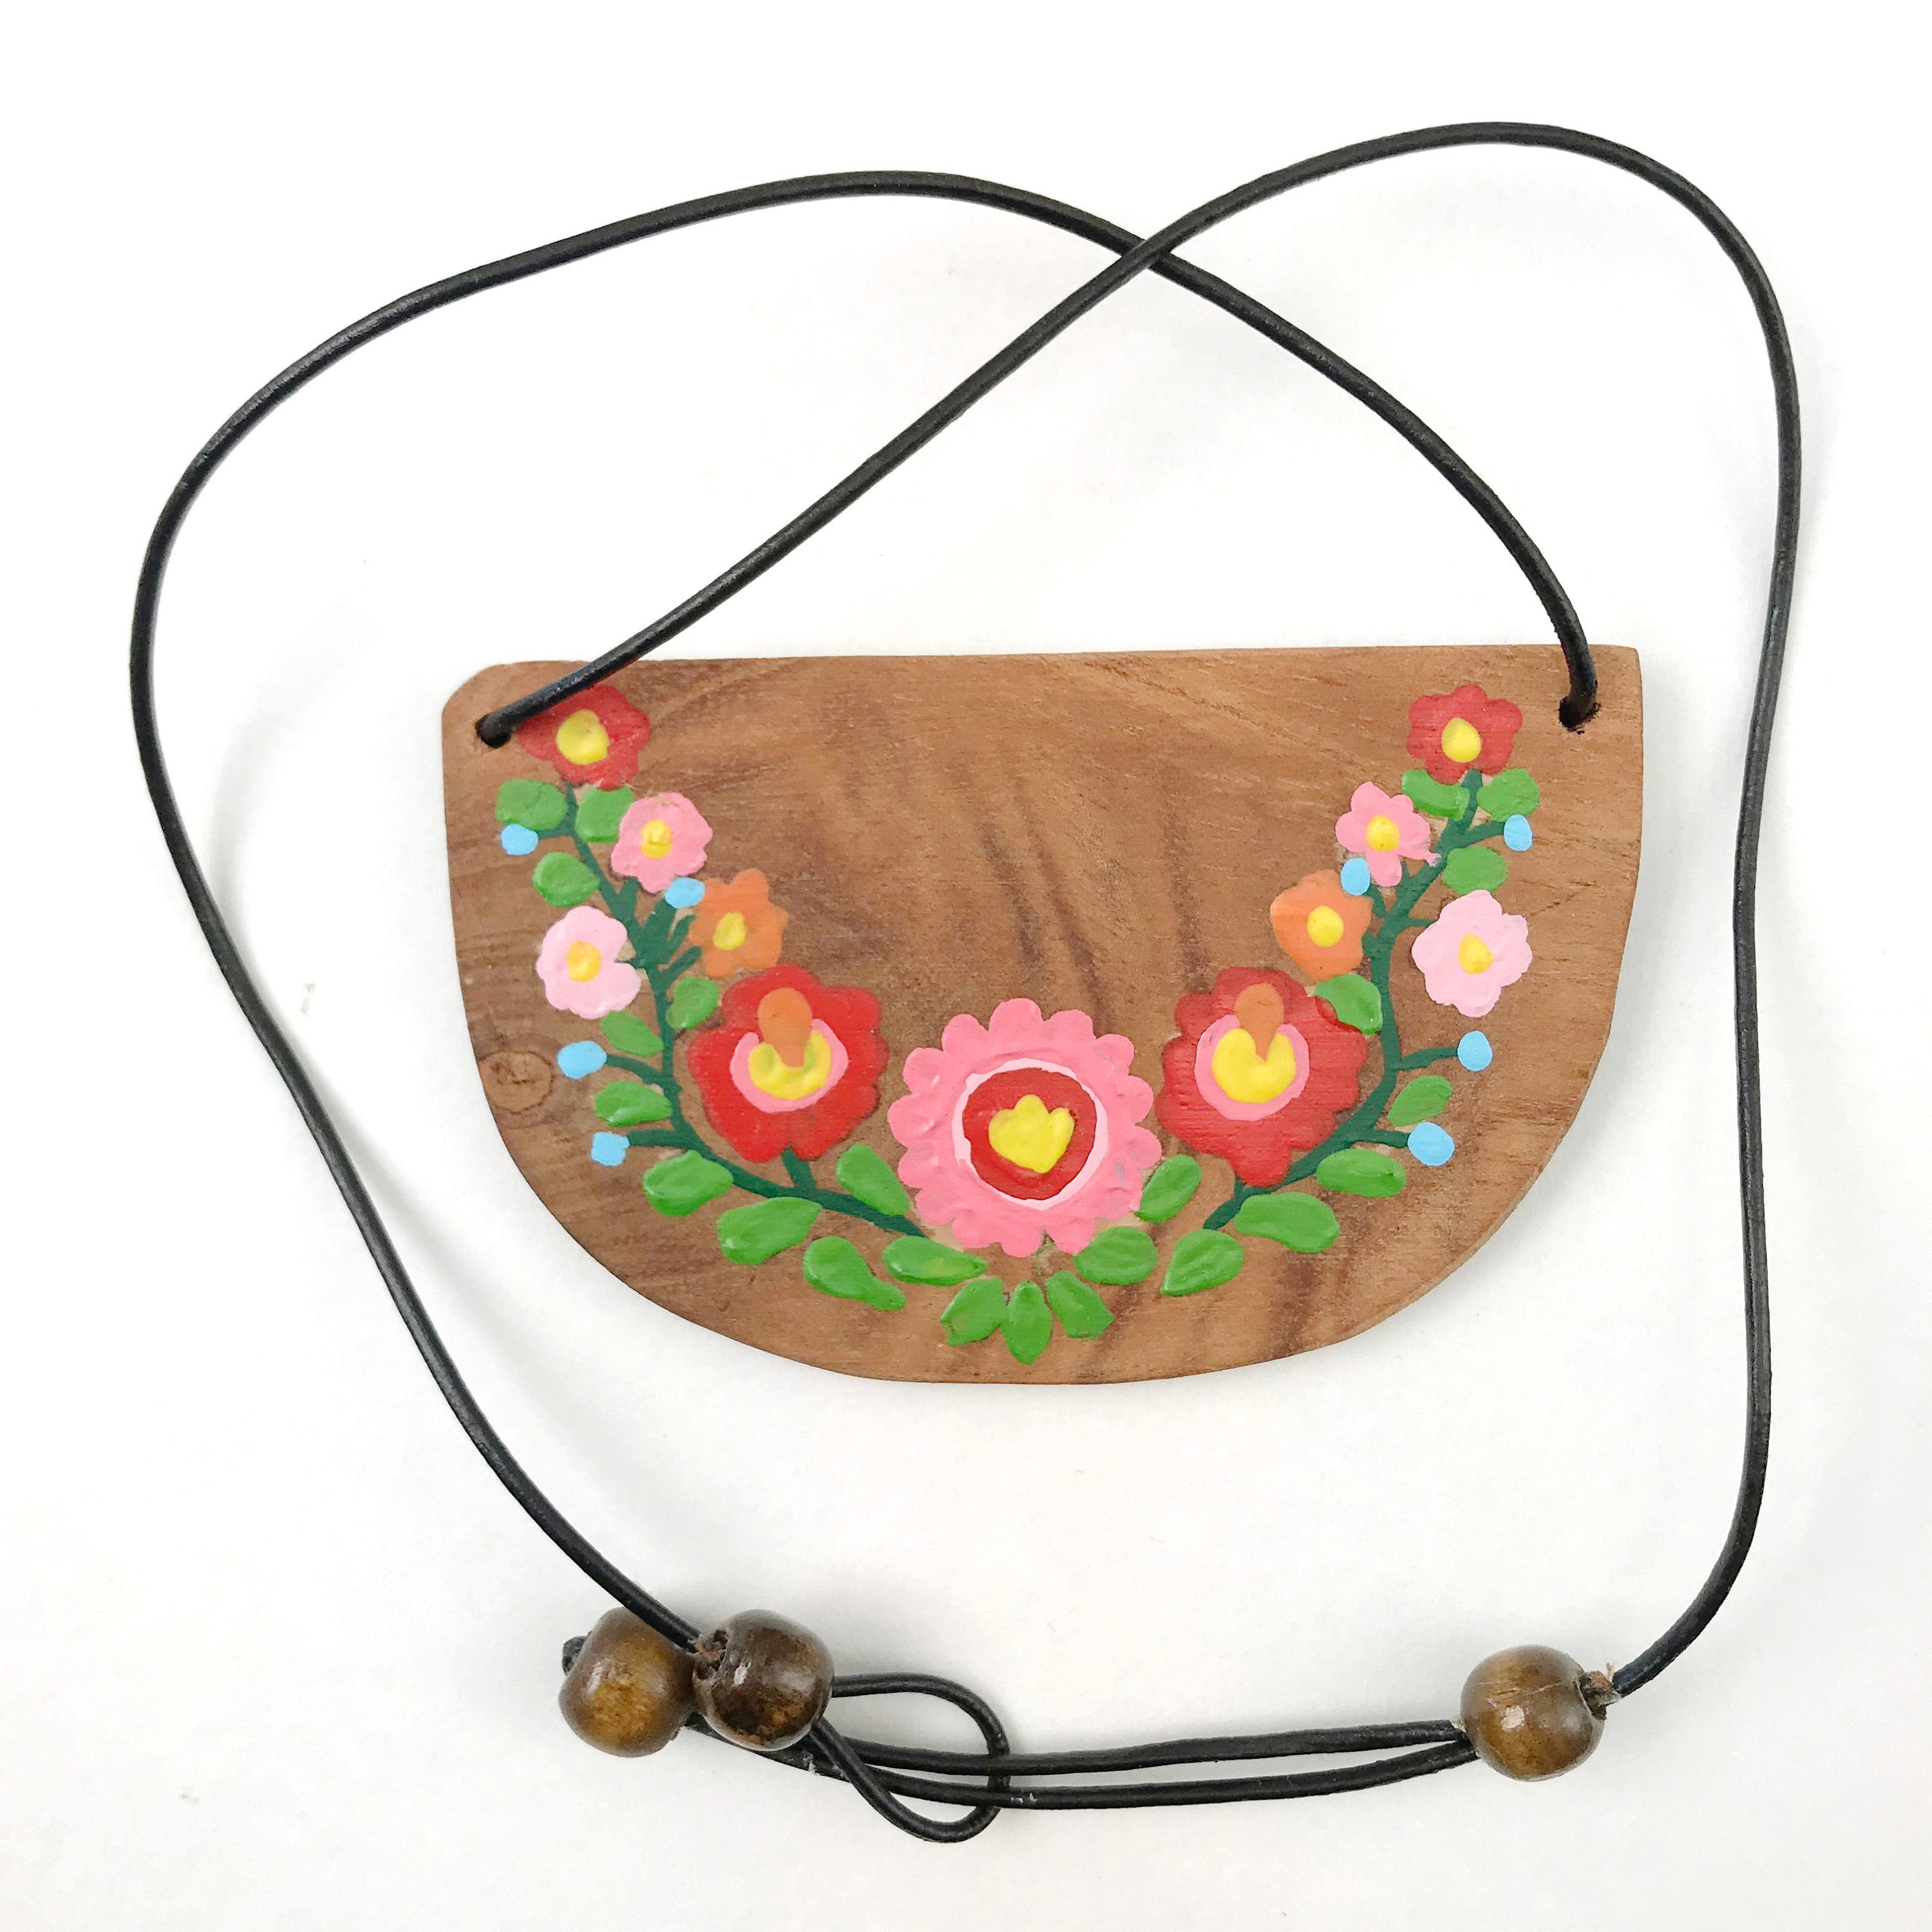 Fine art painting flowers over wood pendant in hippie boho style. Wooden hand painted necklace with flowers.